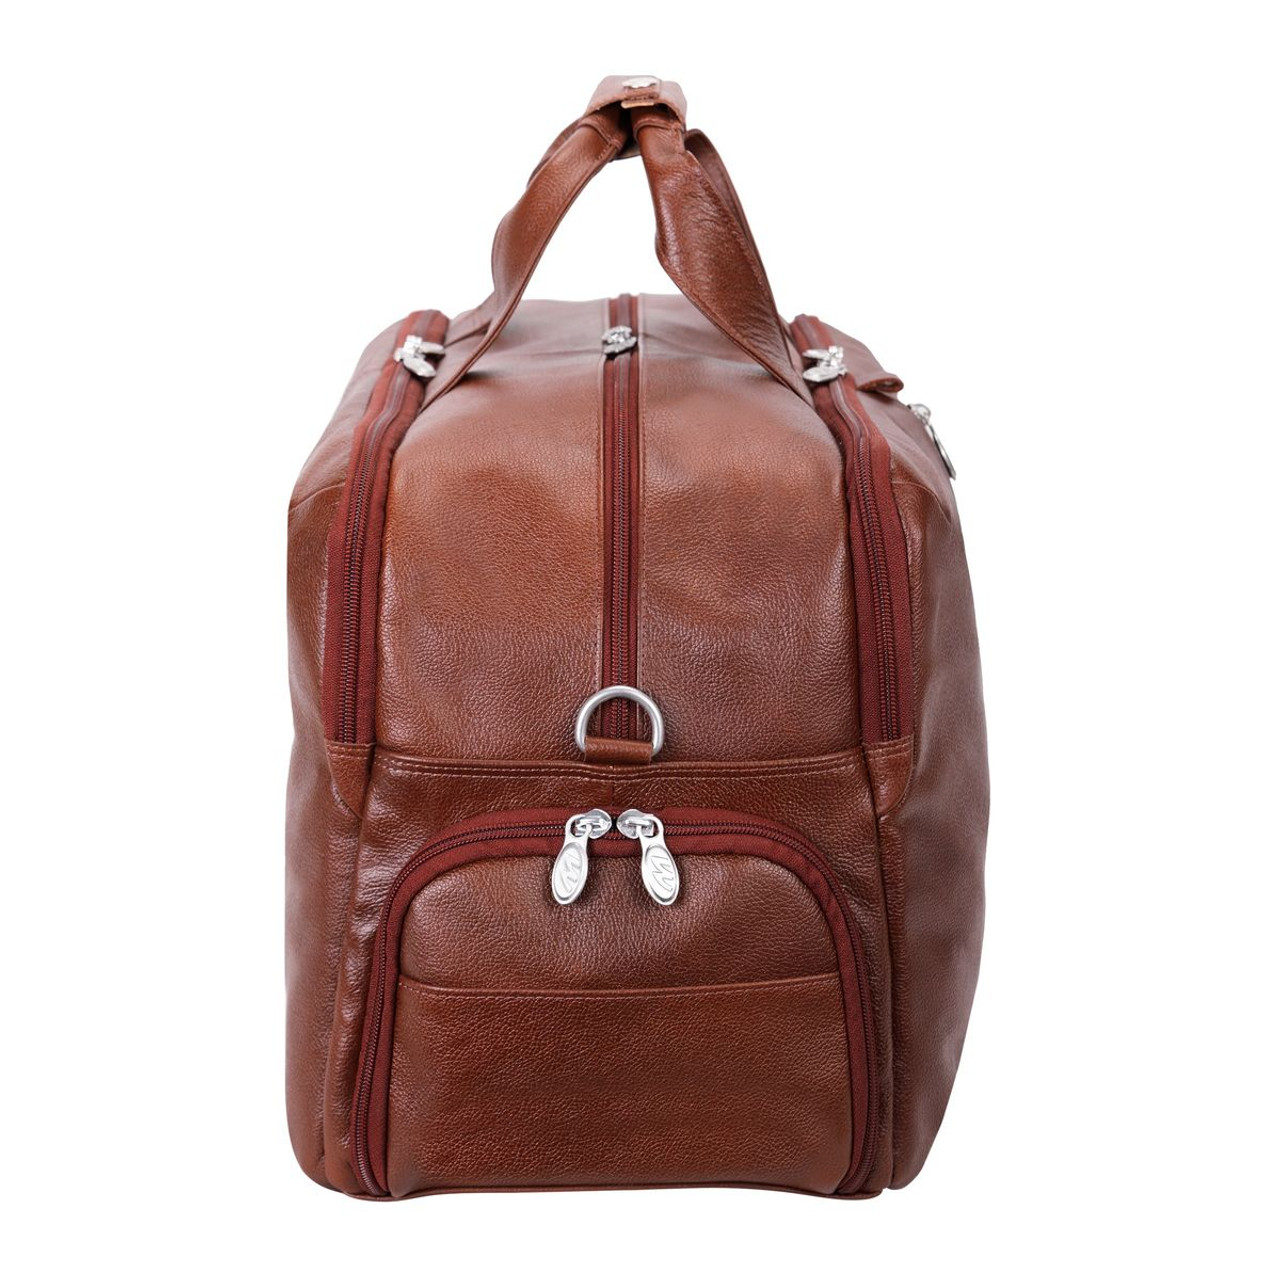 AVONDALE Leather Carry-All 17-inch Laptop Duffel Bag product image